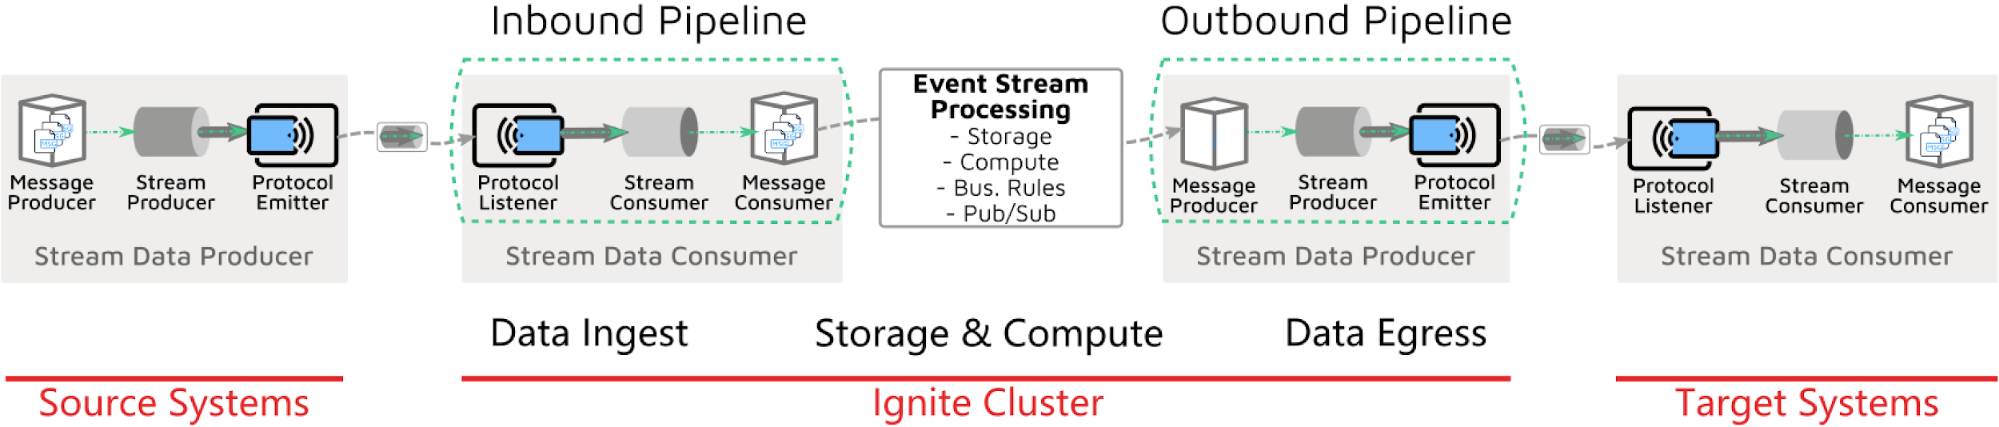 Event Stream Processing with Apache Ignite - Image 5